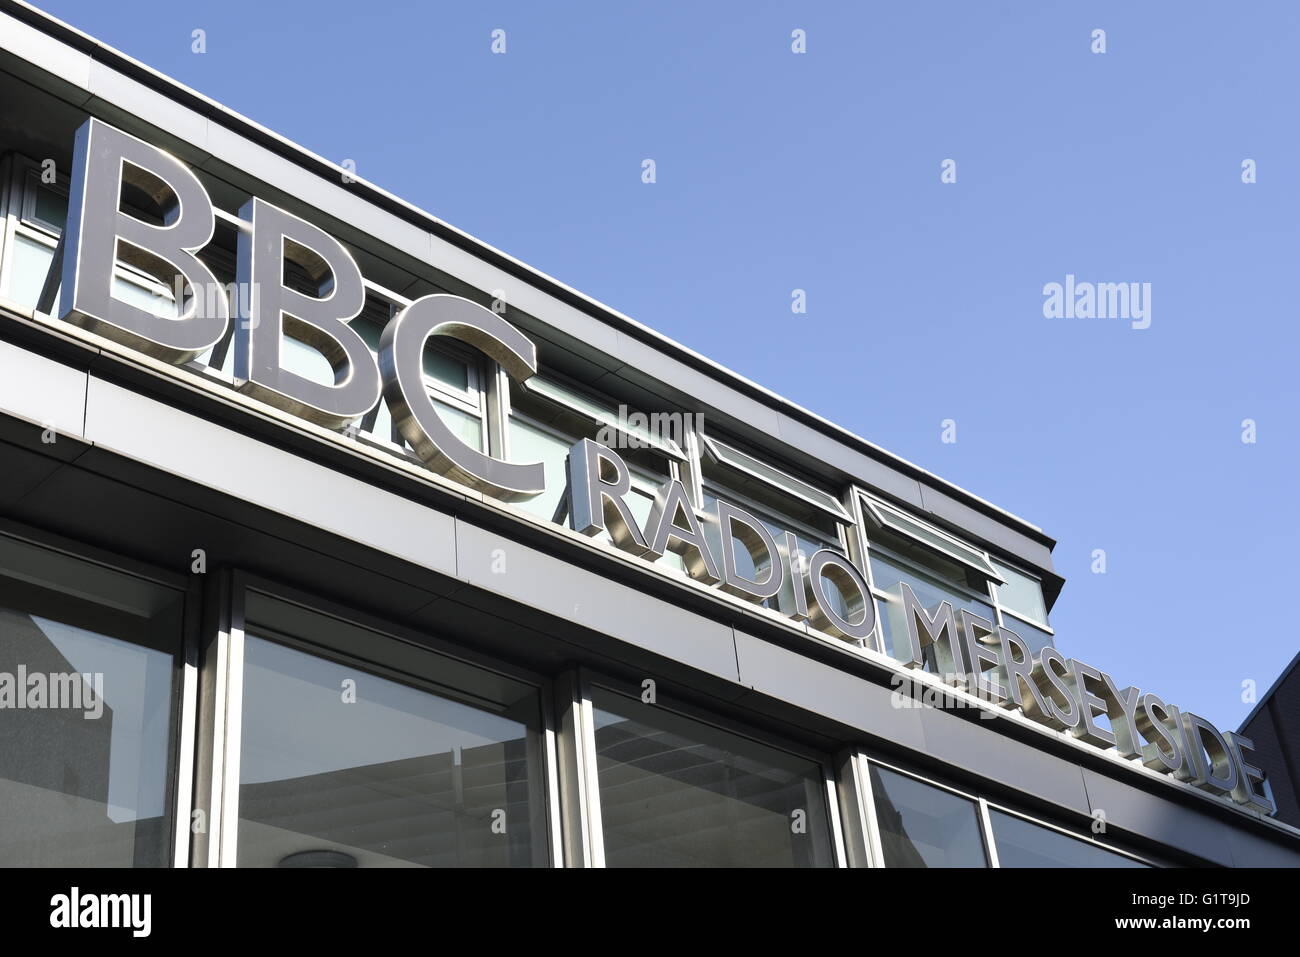 Sign at the entrance to BBC Radio Merseyside, 55 Paradise Street, Liverpool L1 3BP Stock Photo